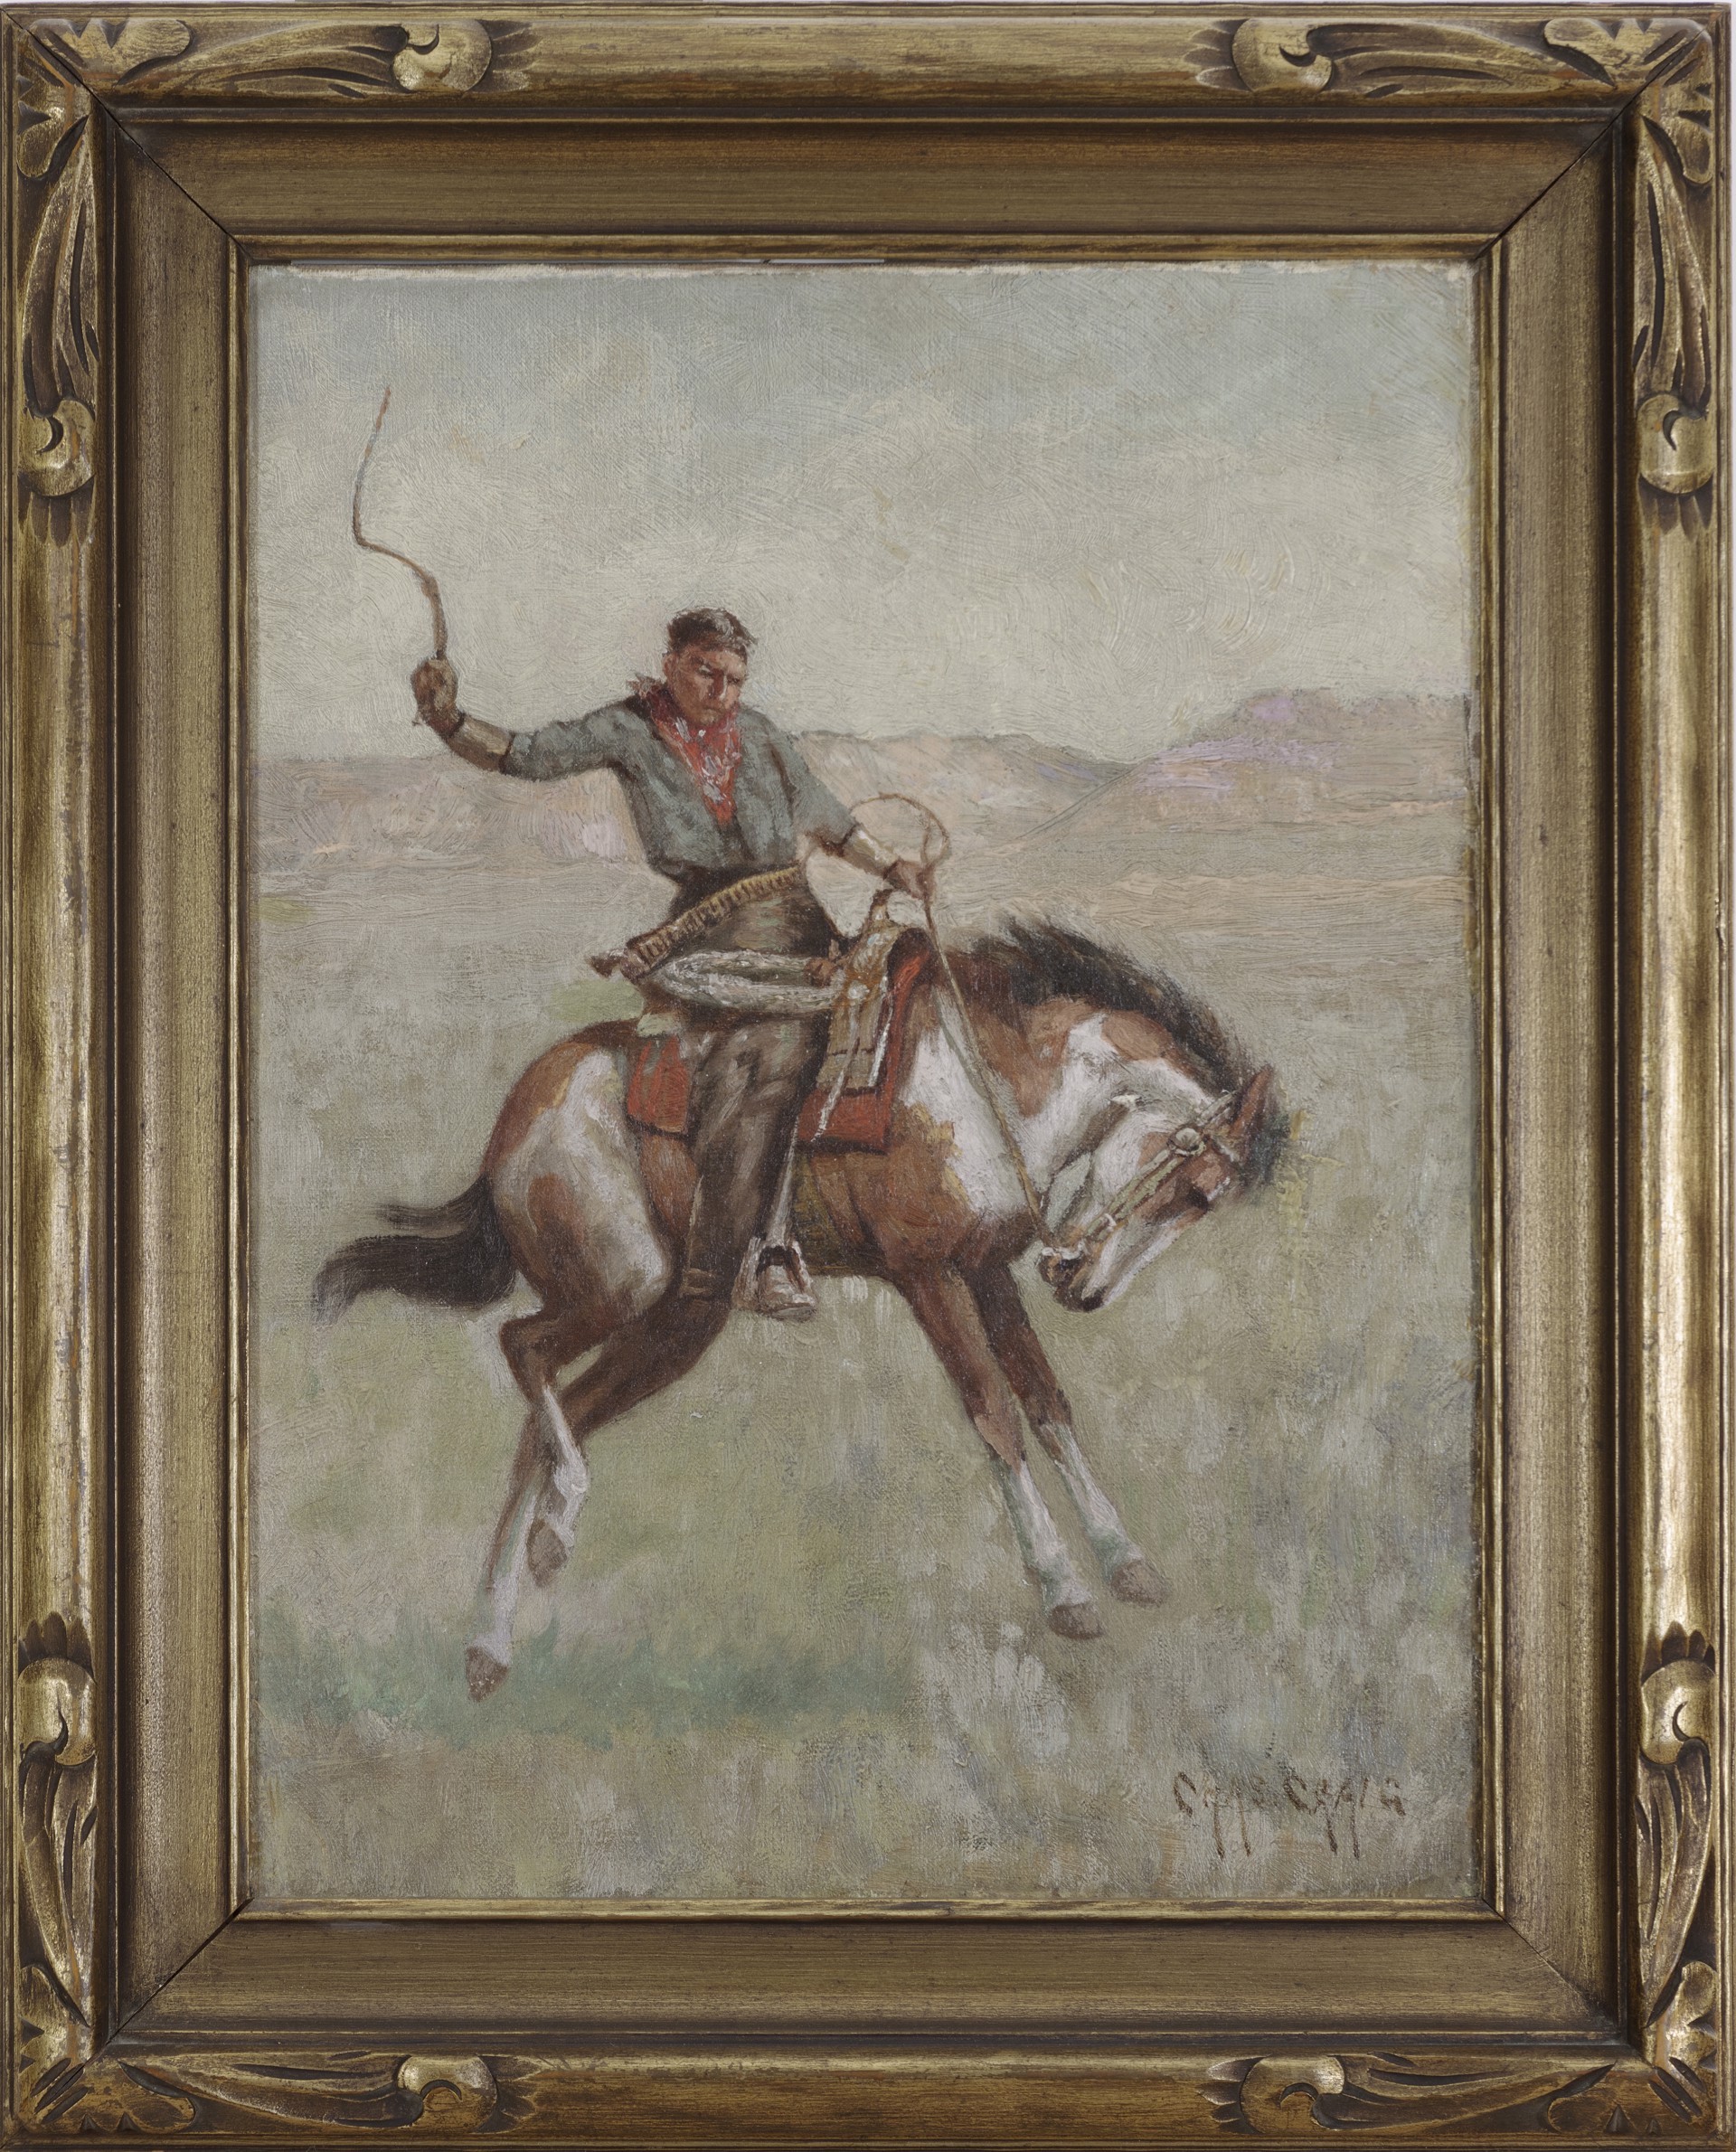 Cowboy on Horseback (To be sold as pair with 11059g-Native American on Horseback) by Charles Craig